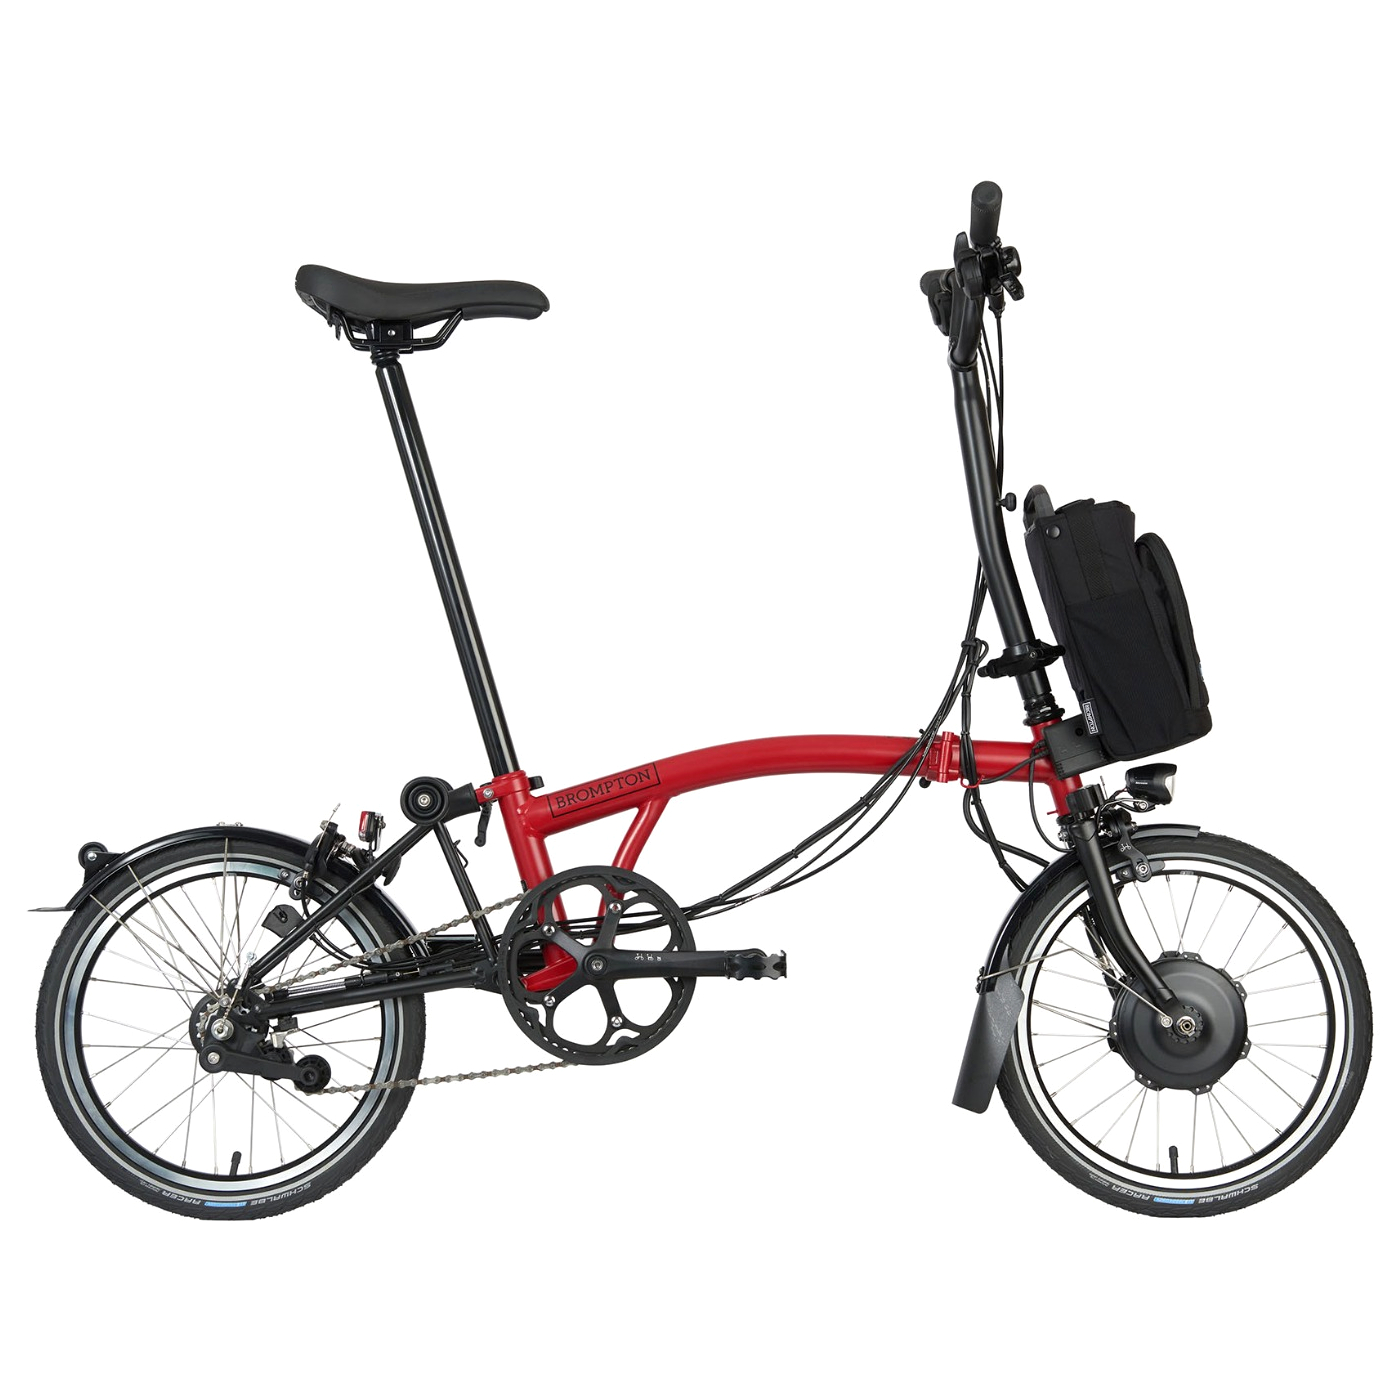 https://images.bike24.com/i/mb/a3/32/b4/electric-c-line-explore-6-speed-high-bar-extended-seatpost-house-red-1-1452398.jpg